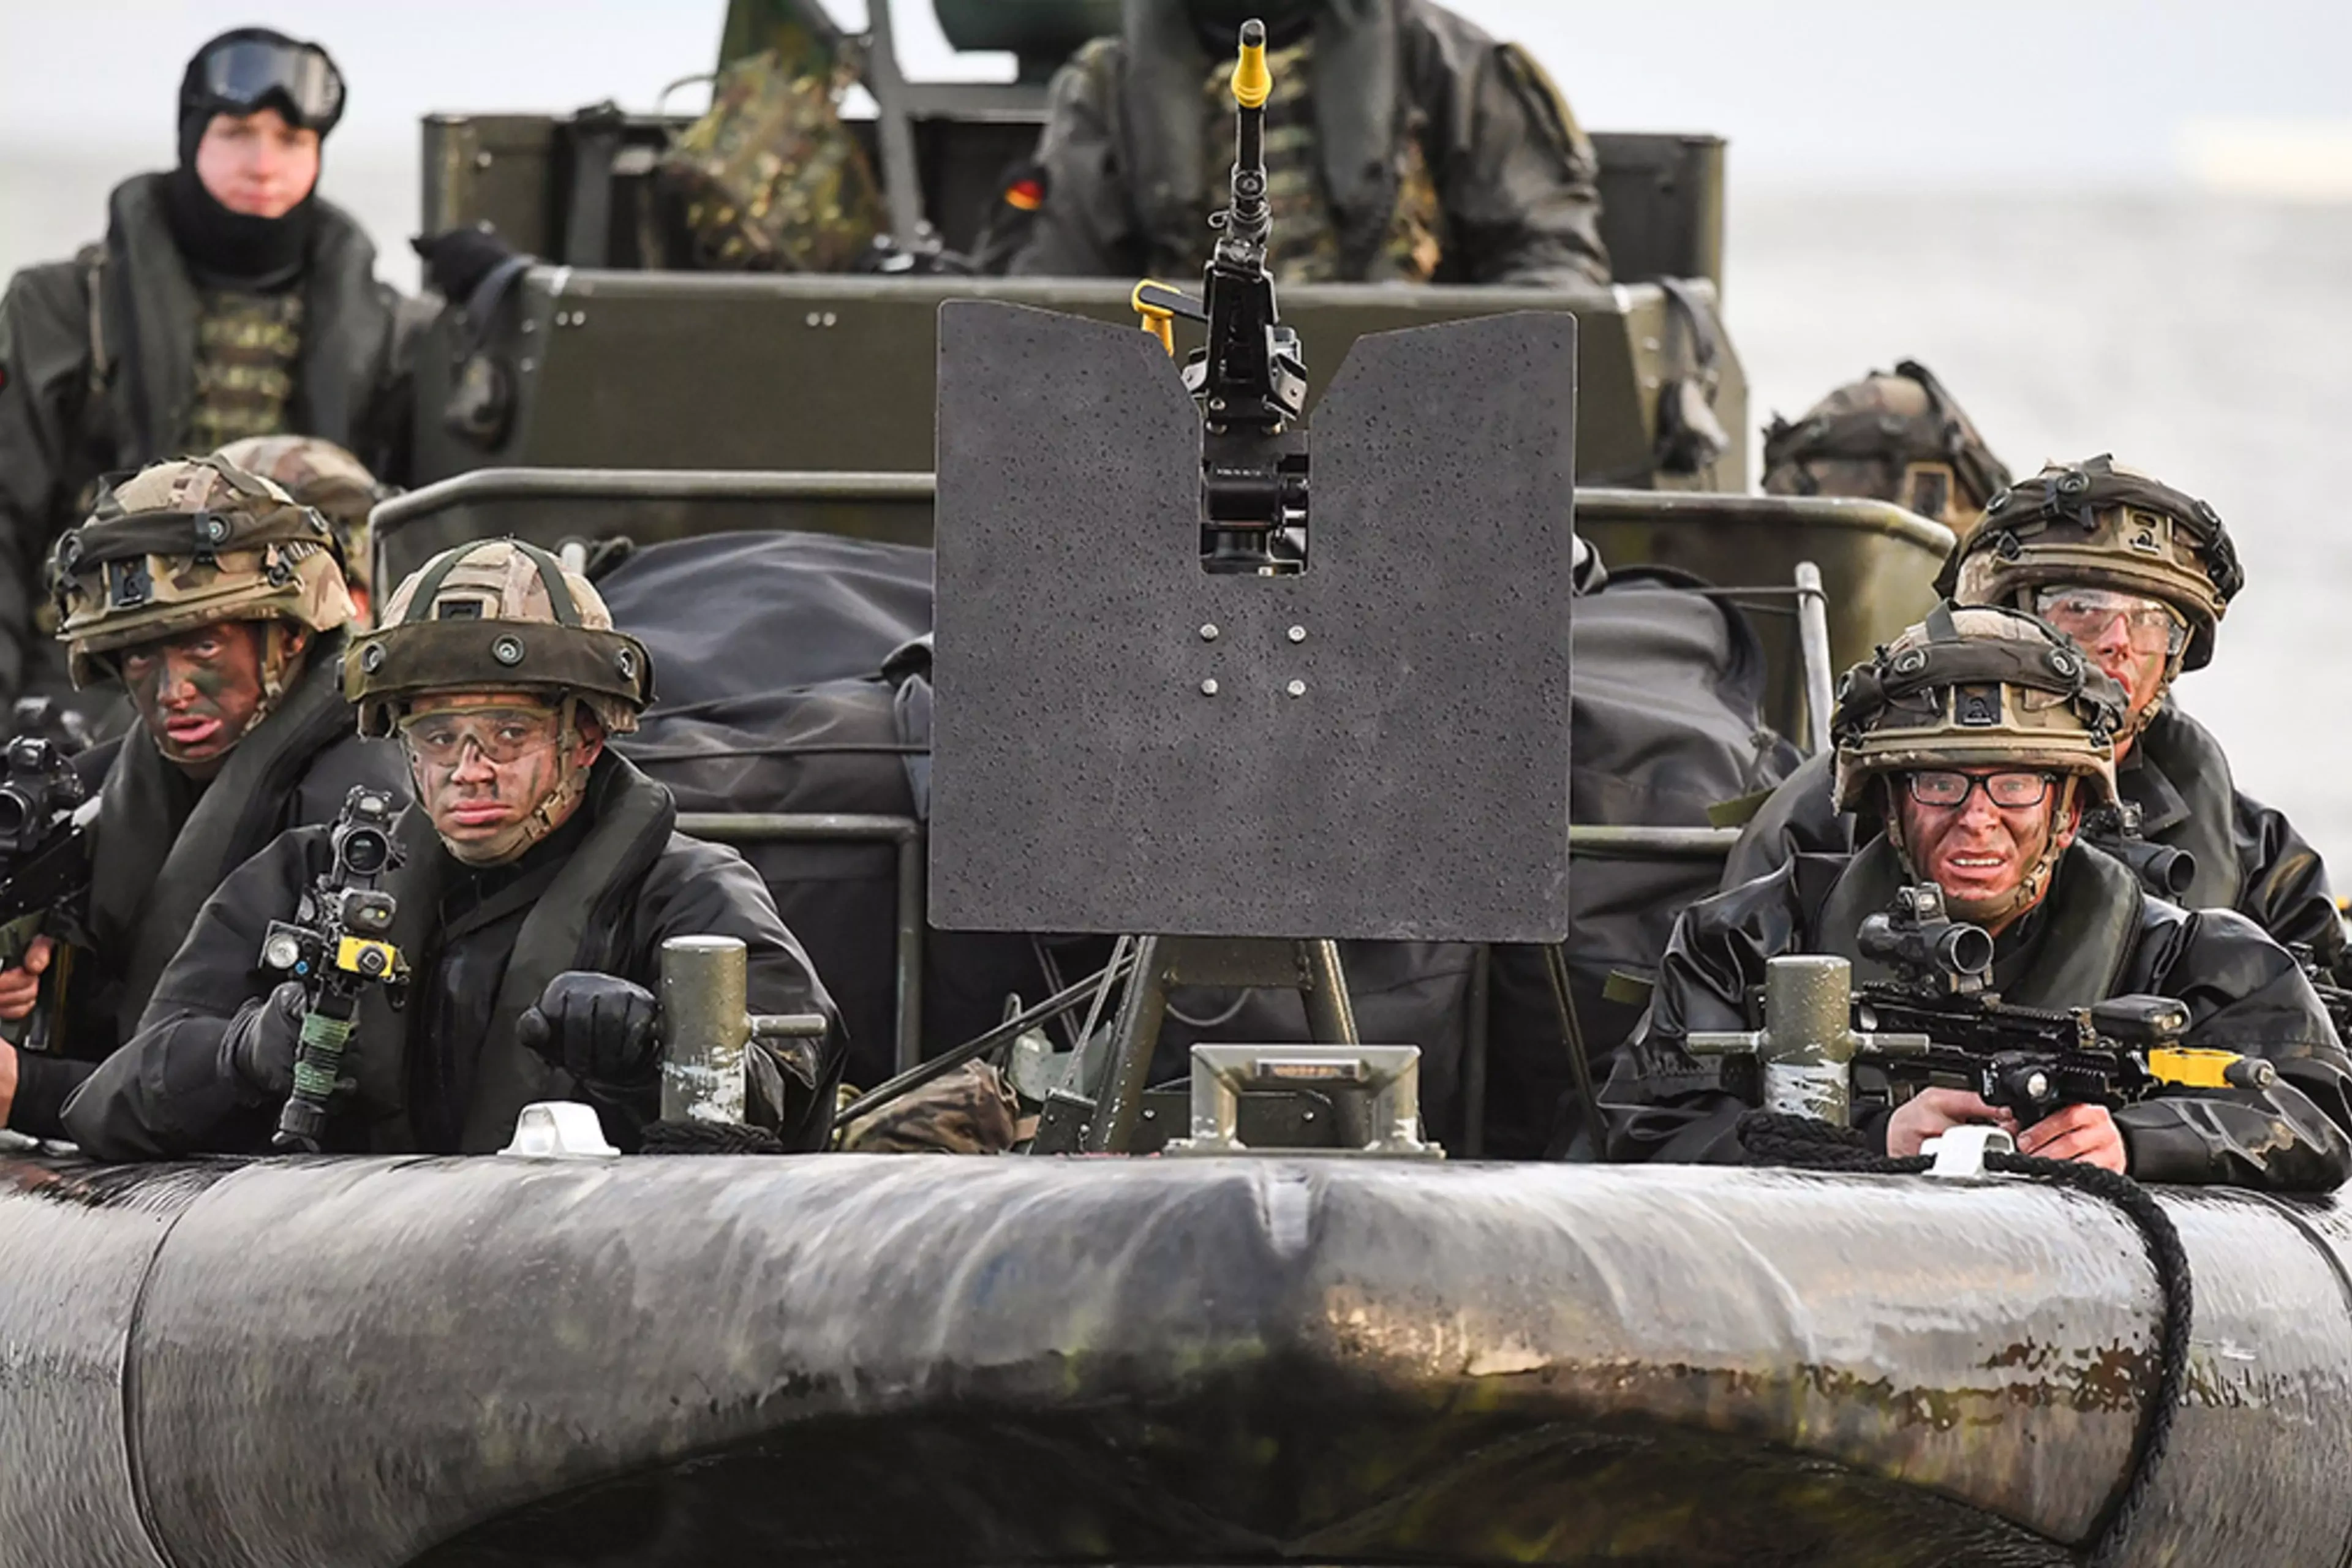 UK Royal Marines take part in NATO's Exercise Joint Warrior in April 2018 in Scotland. 